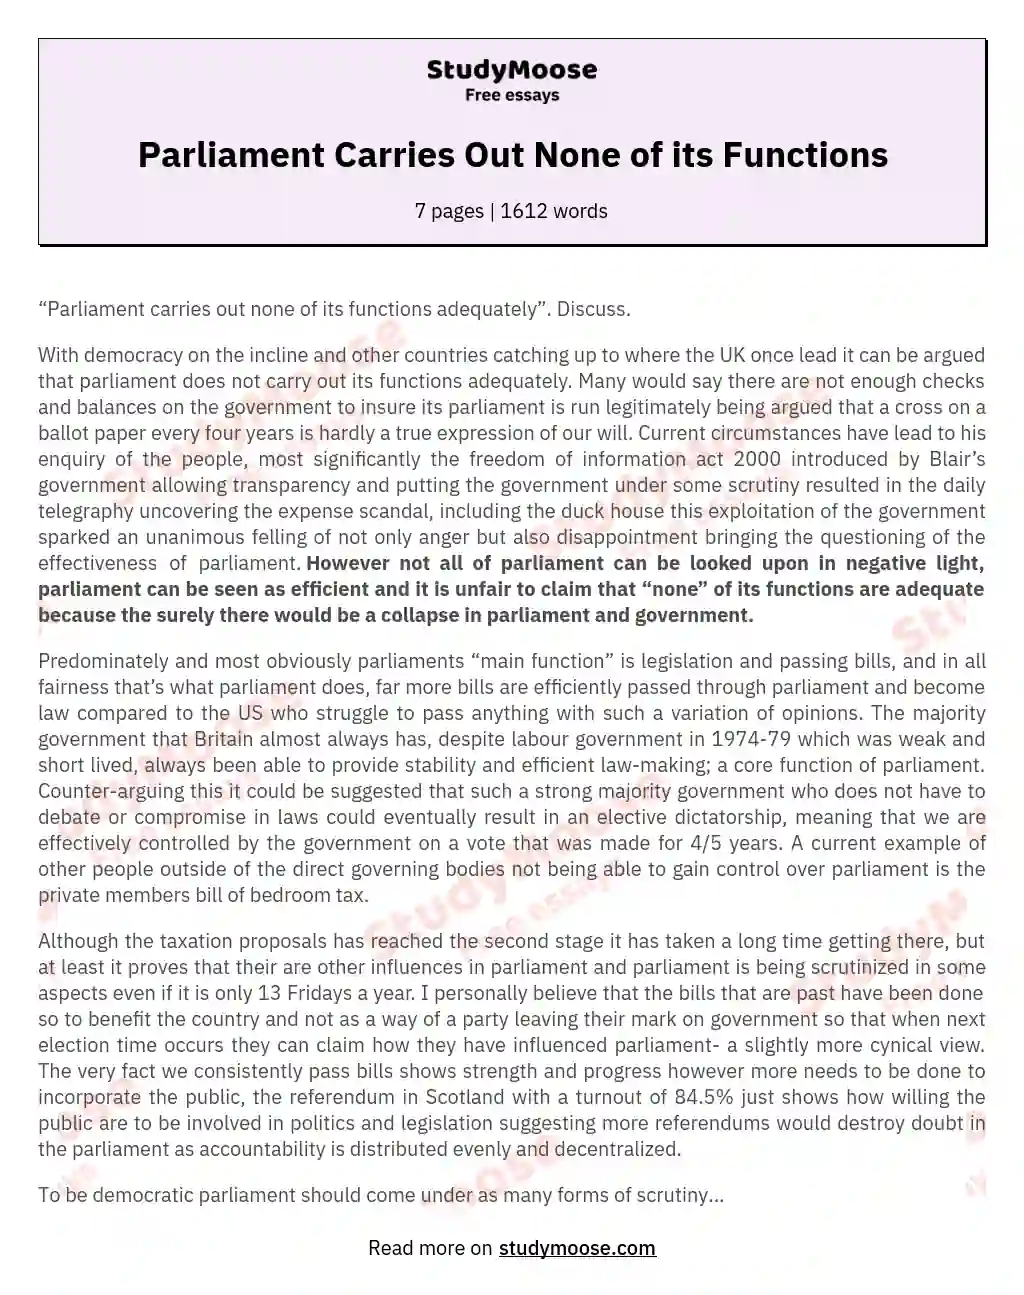 Parliament Carries Out None of its Functions essay